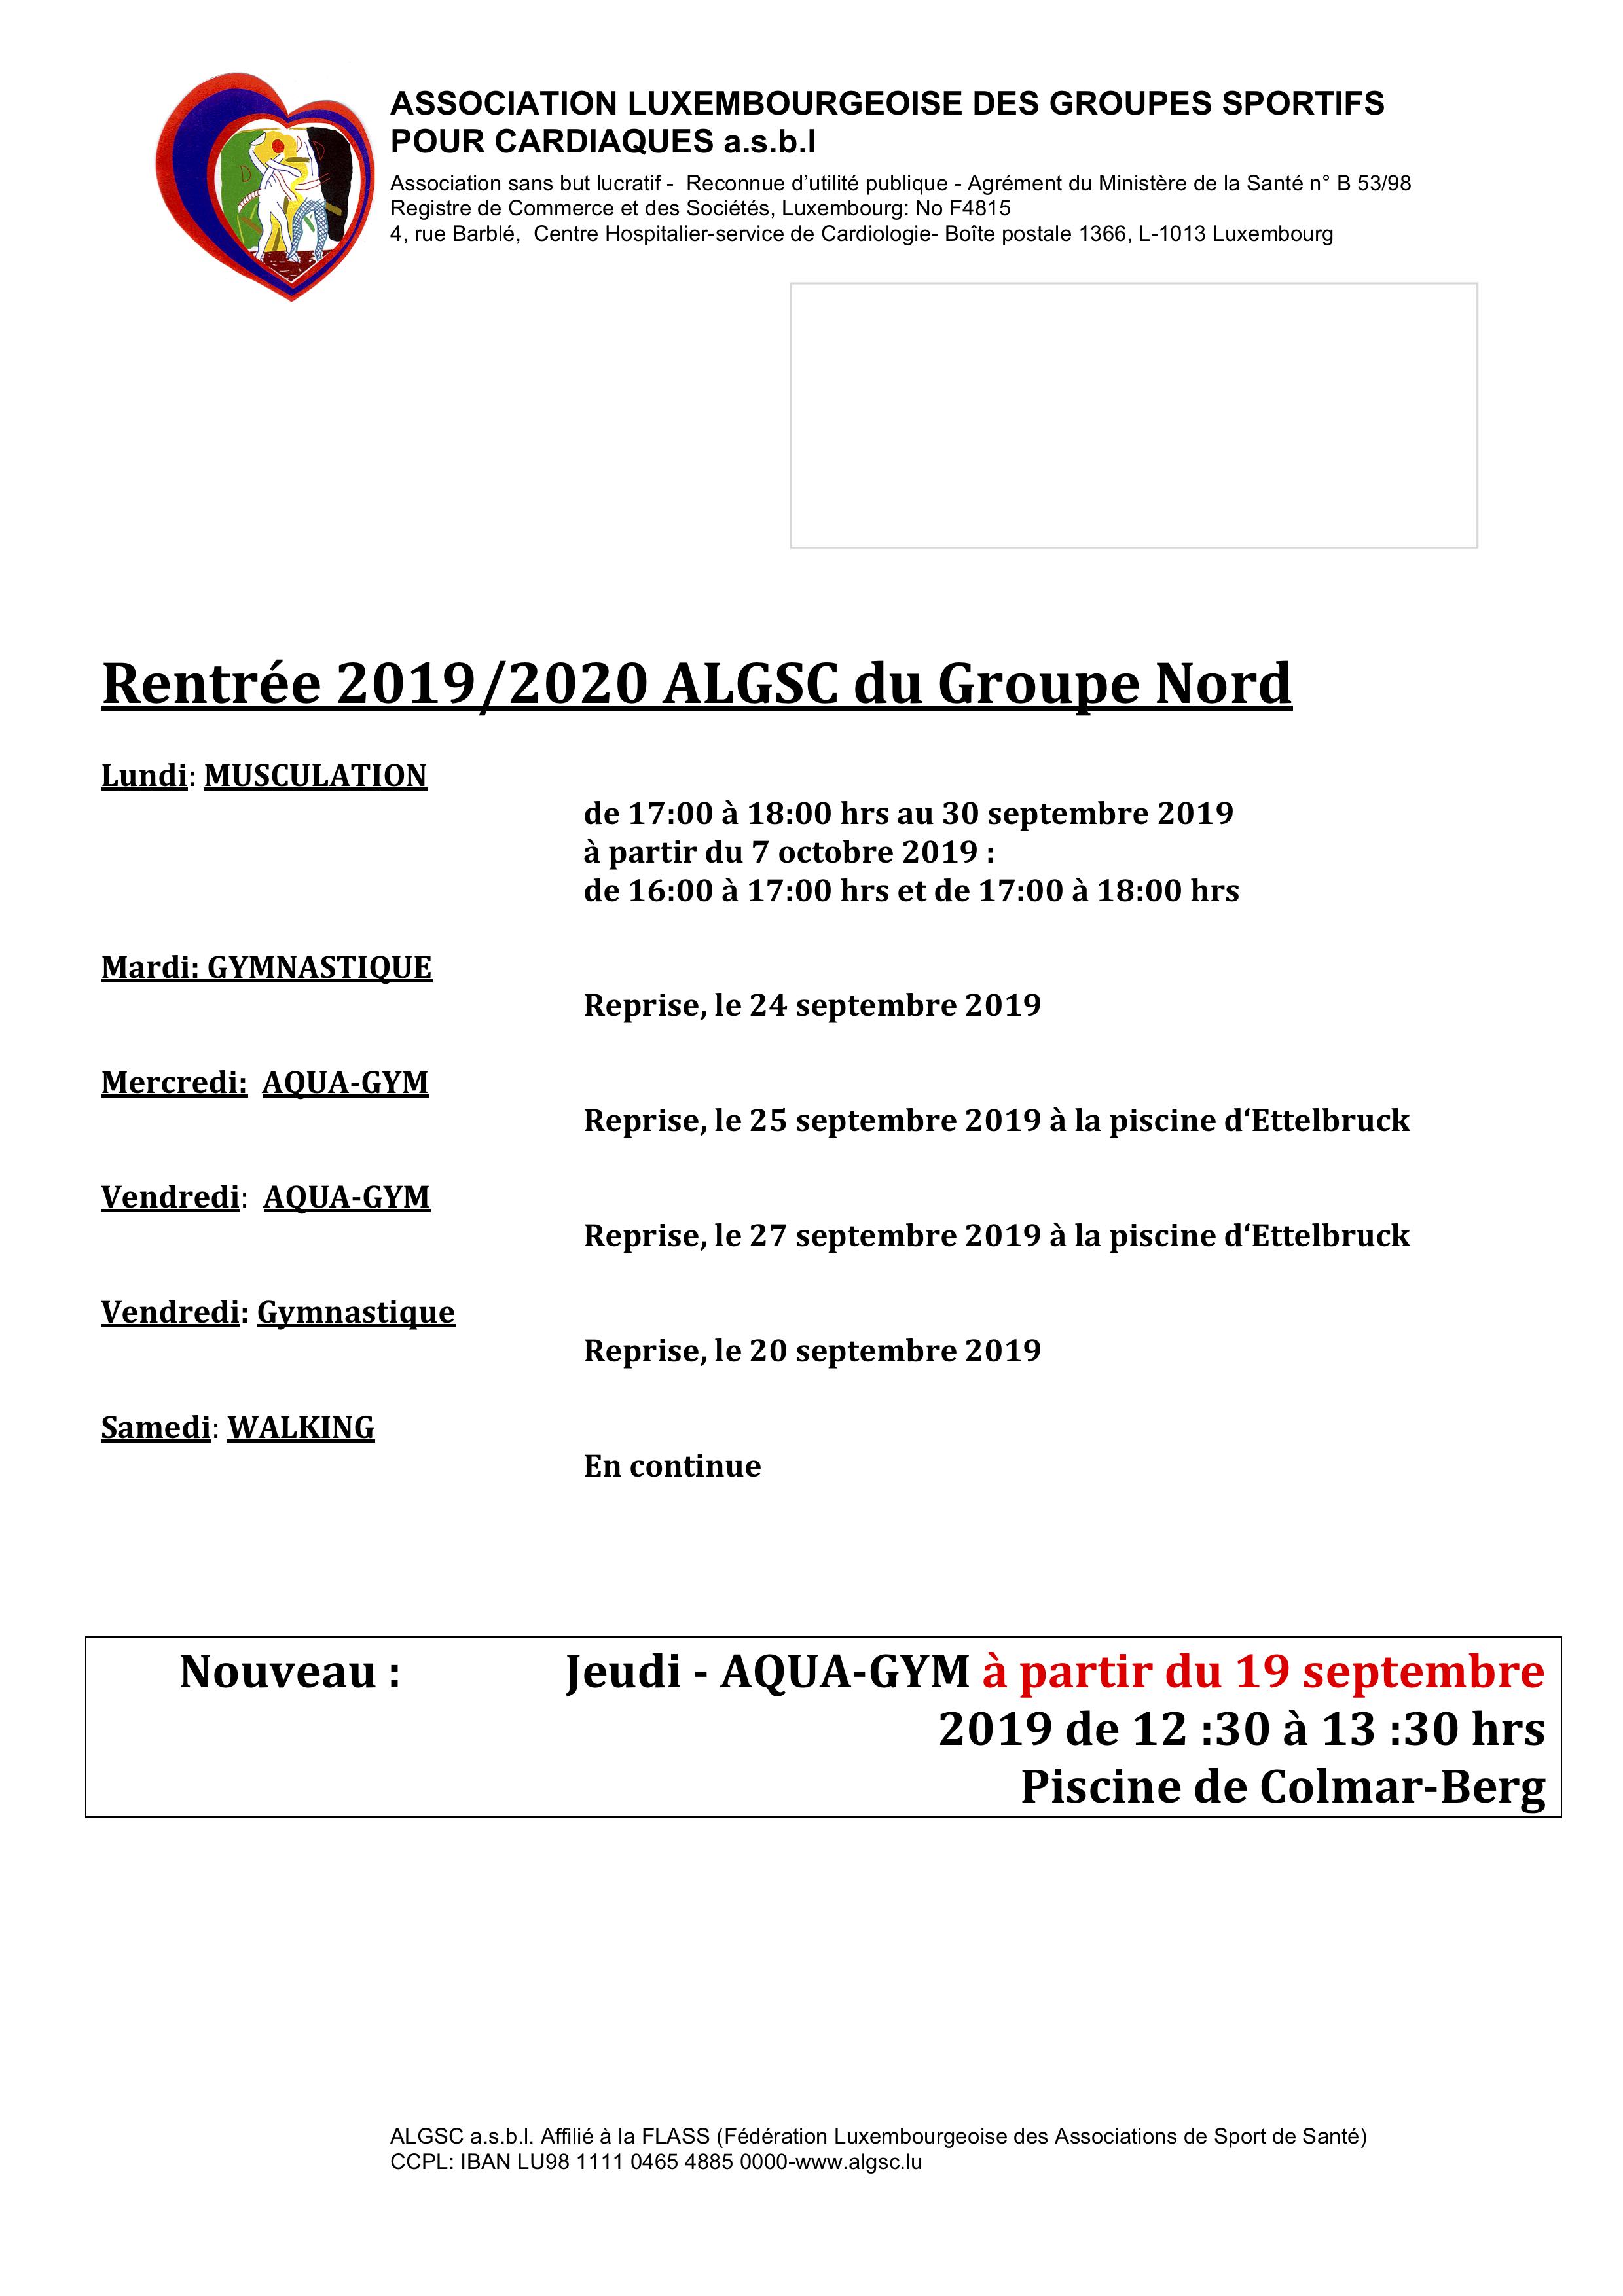 NORD GSP Rentrée 2019 courrier